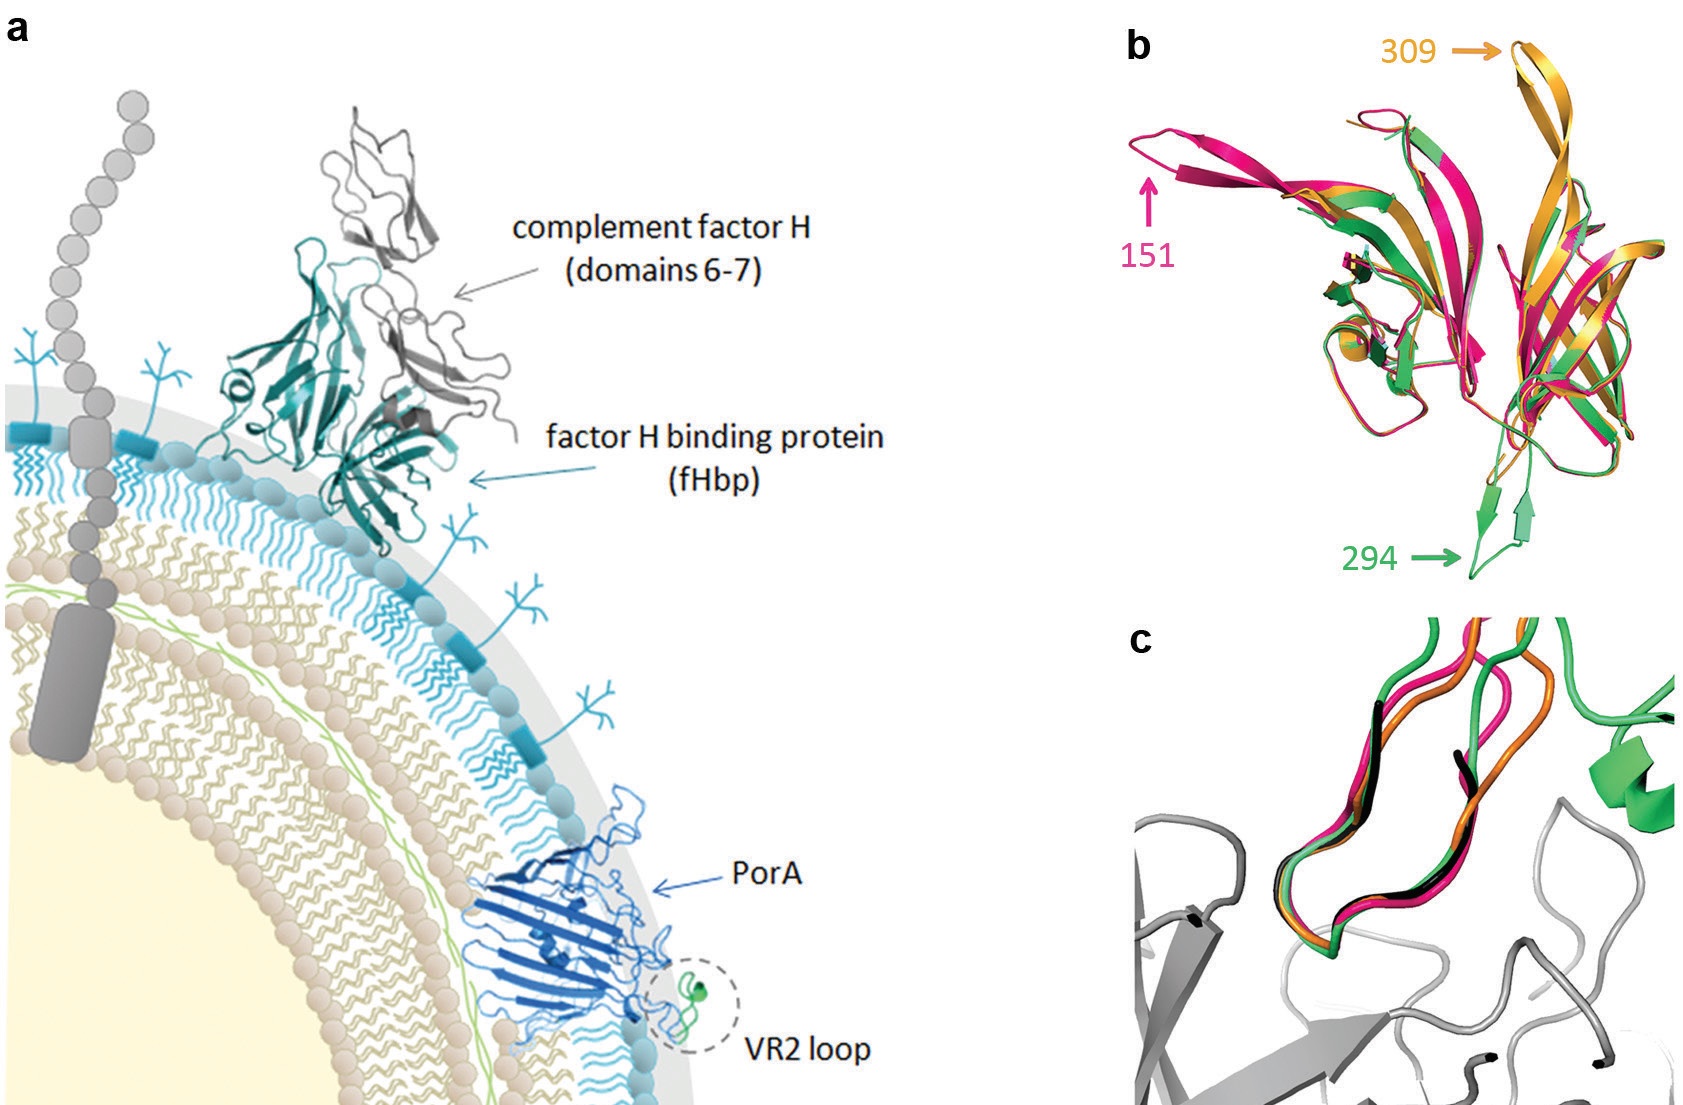 Figure 1: (a) Schematic of N. meningitidis cell surface, shown are the major antigens fHbp (in a complex with human complement factor H domains 6-7) and PorA. (b) Structural alignment of fHbp<br/>scaffolds from V1 fHbp peptides with a PorA loop inserted at residue 151 (pink, PDB: 5NQP), 294 (green, PDB: 5NQX) or 309 (orange, PDB: 5NQY). (c) Structural alignment of the PorA VR2 epitopes in the<br/>fHbp scaffold (151, pink; 294, green; 309, orange) with a linear peptide of PorA VR2 P1.16 (black) in a complex with a bactericidal Fab fragment (grey) from monoclonal antibody MN12H2 (PDB: 2MPA).